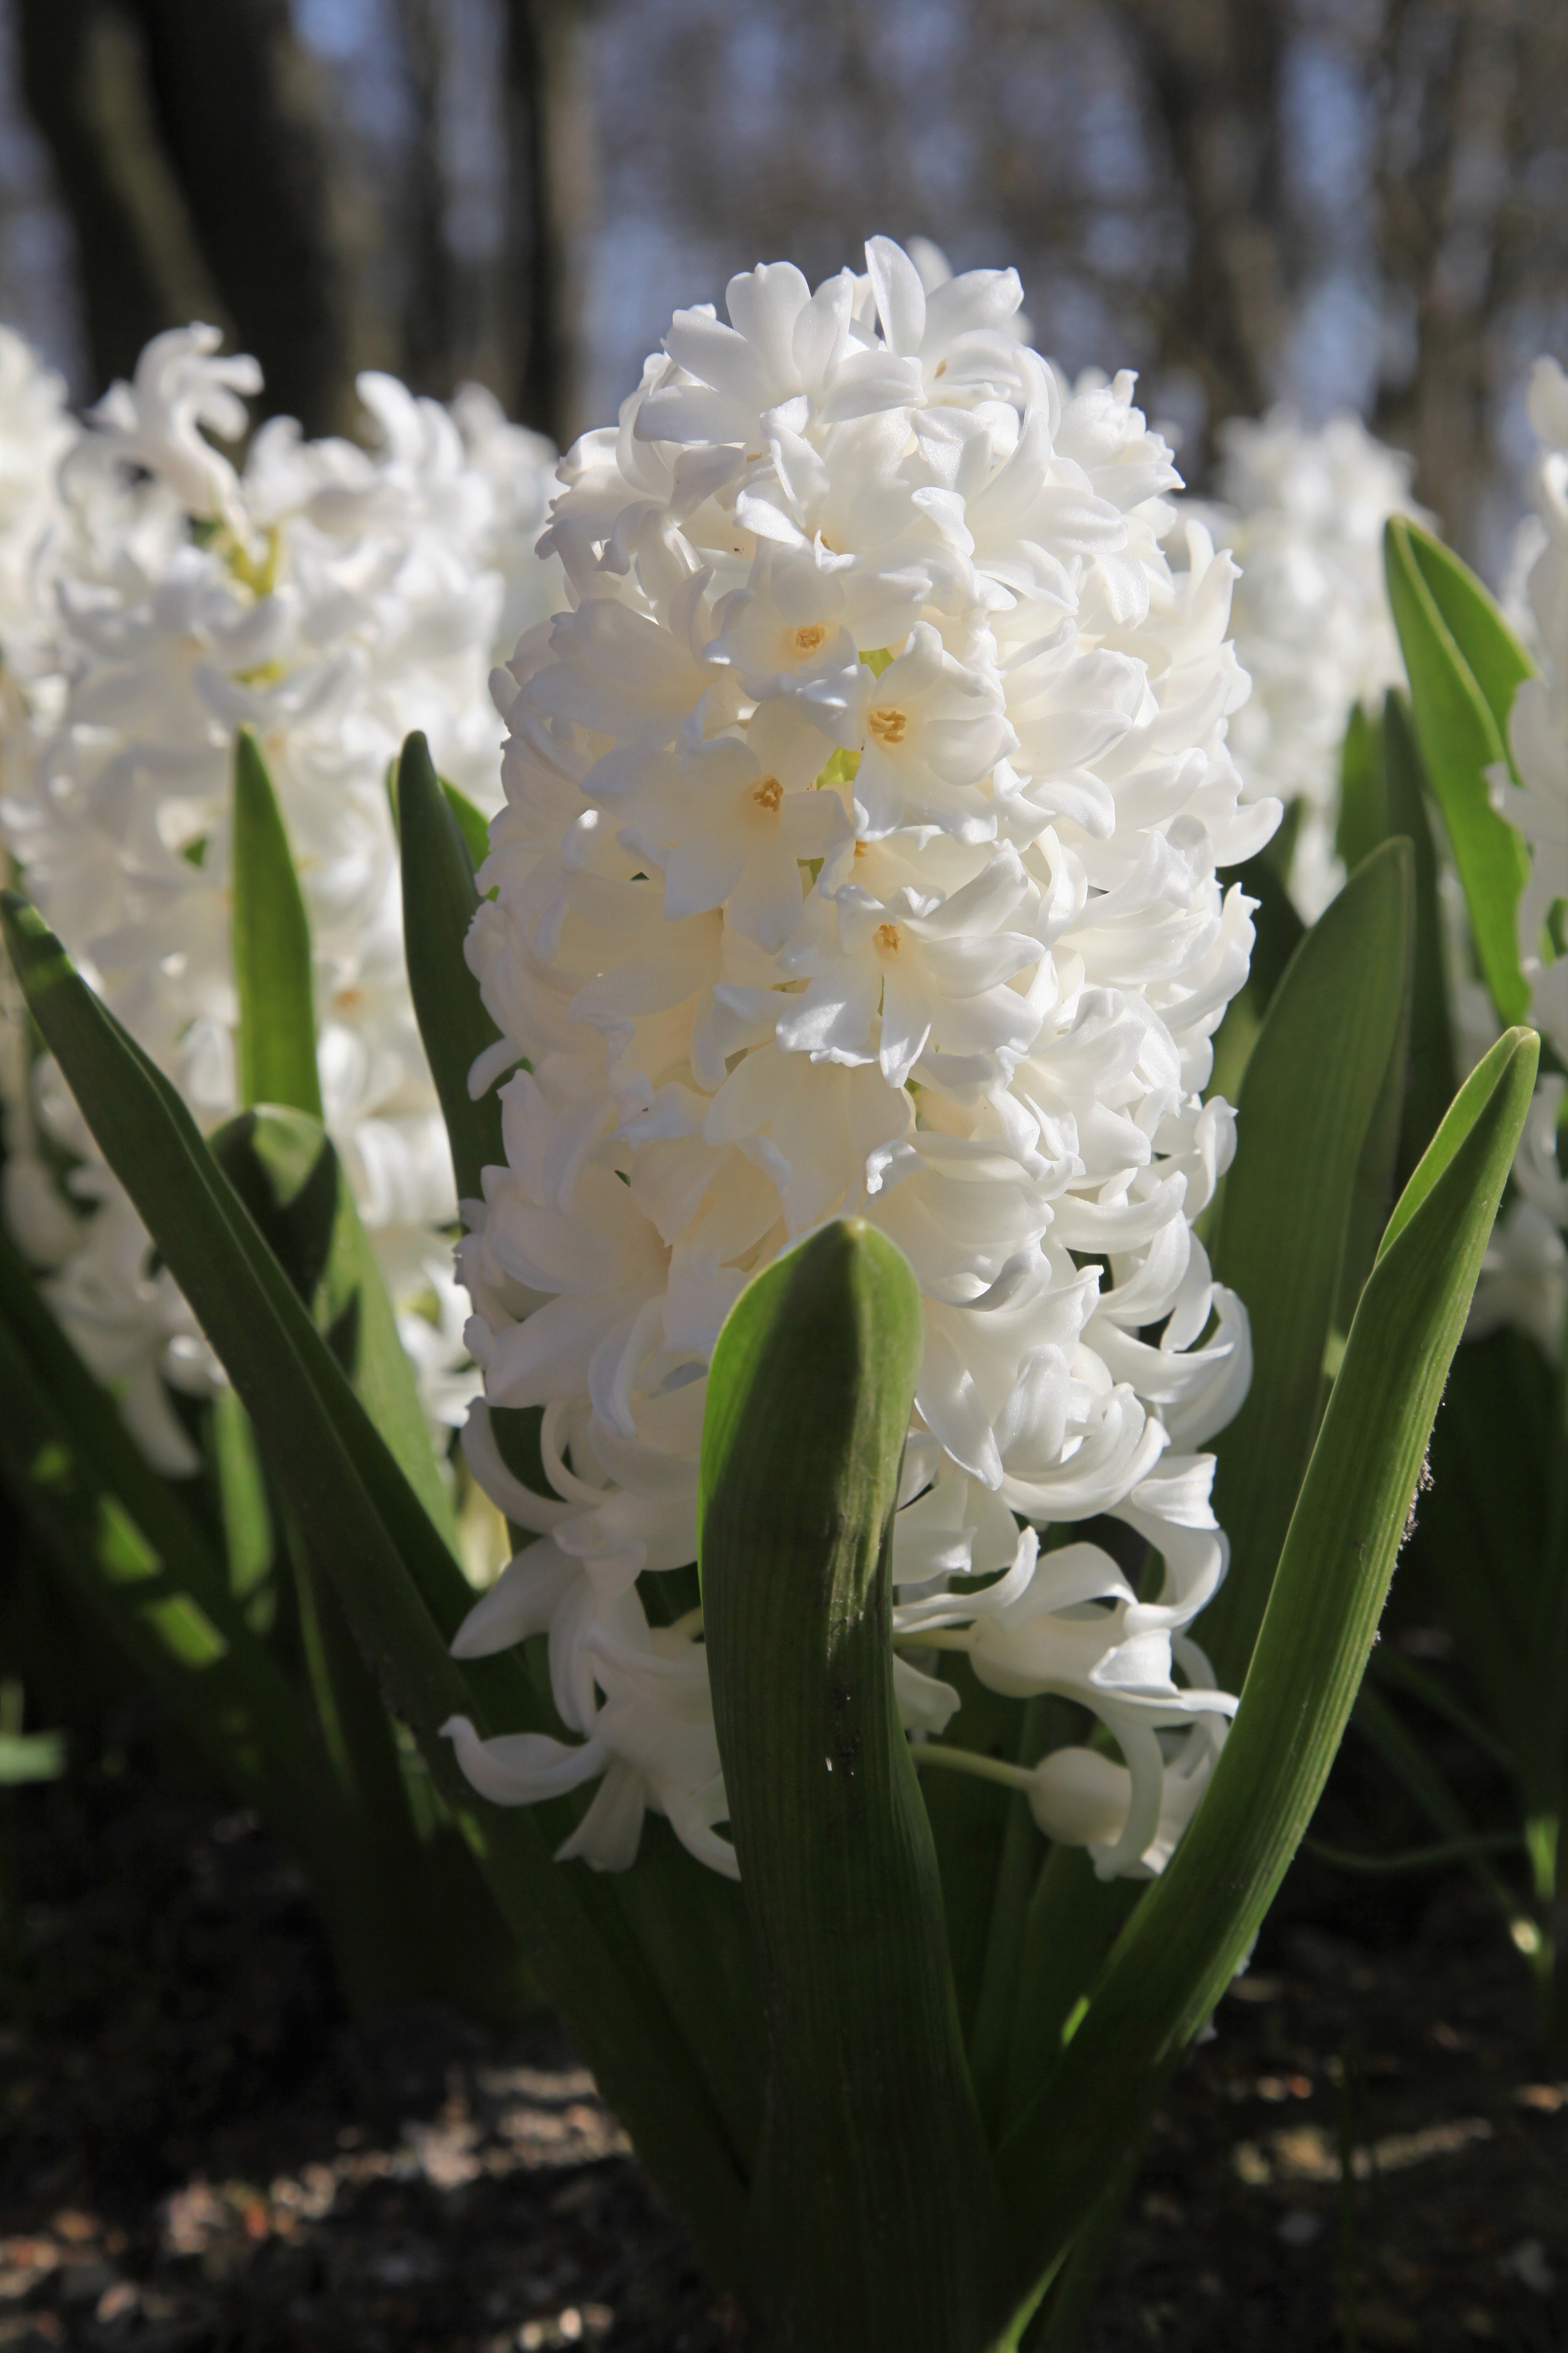 Close-up of Hyacinth Carnegie with white florets and green foliage